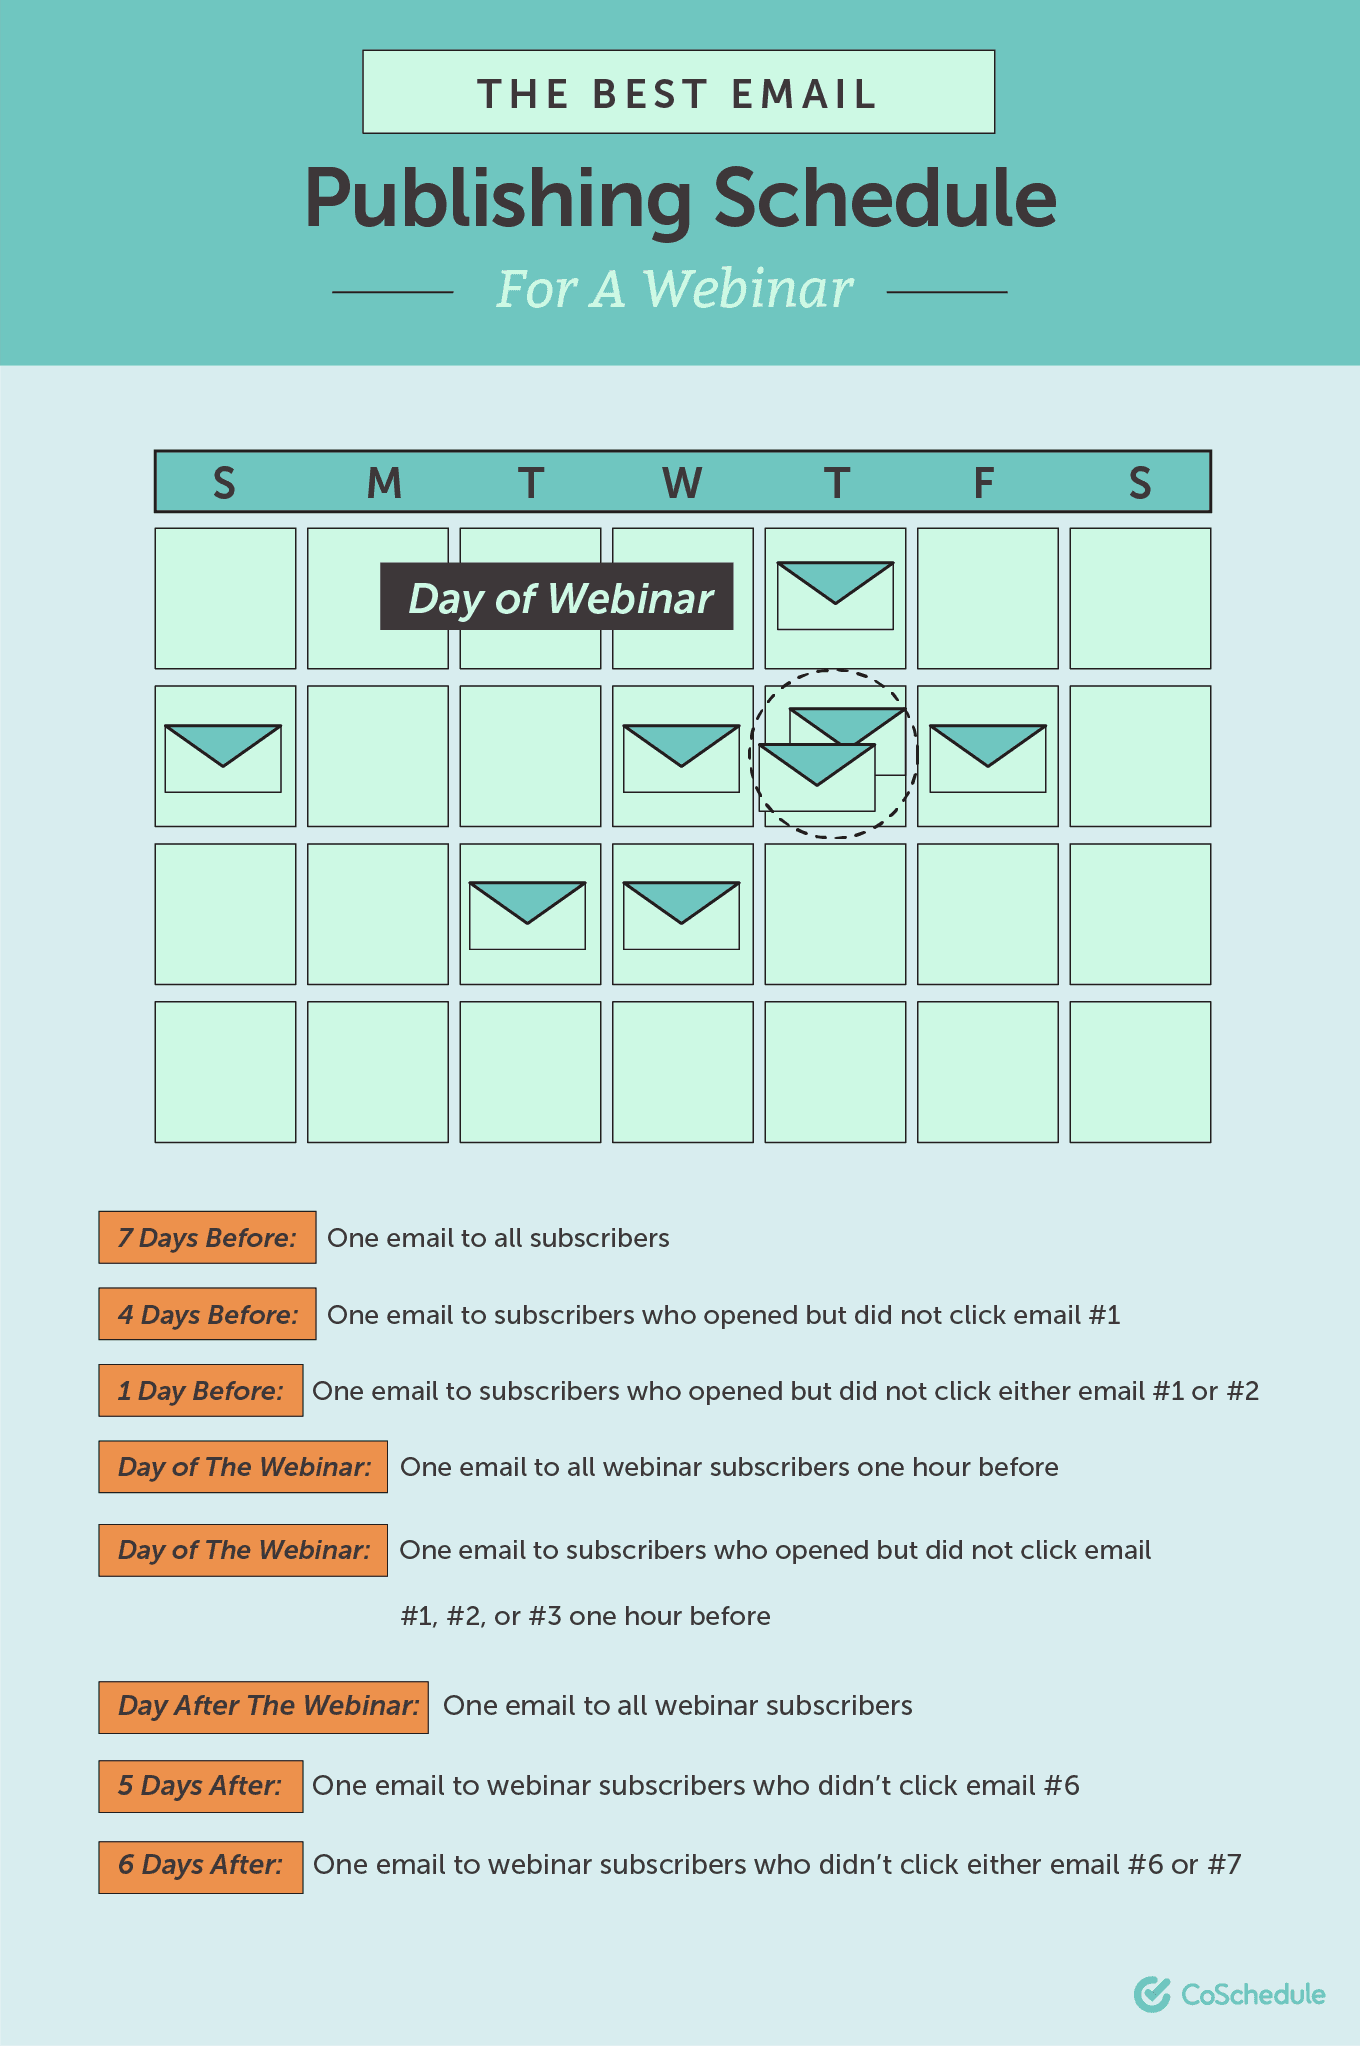 Best email publishing schedule for a webinar